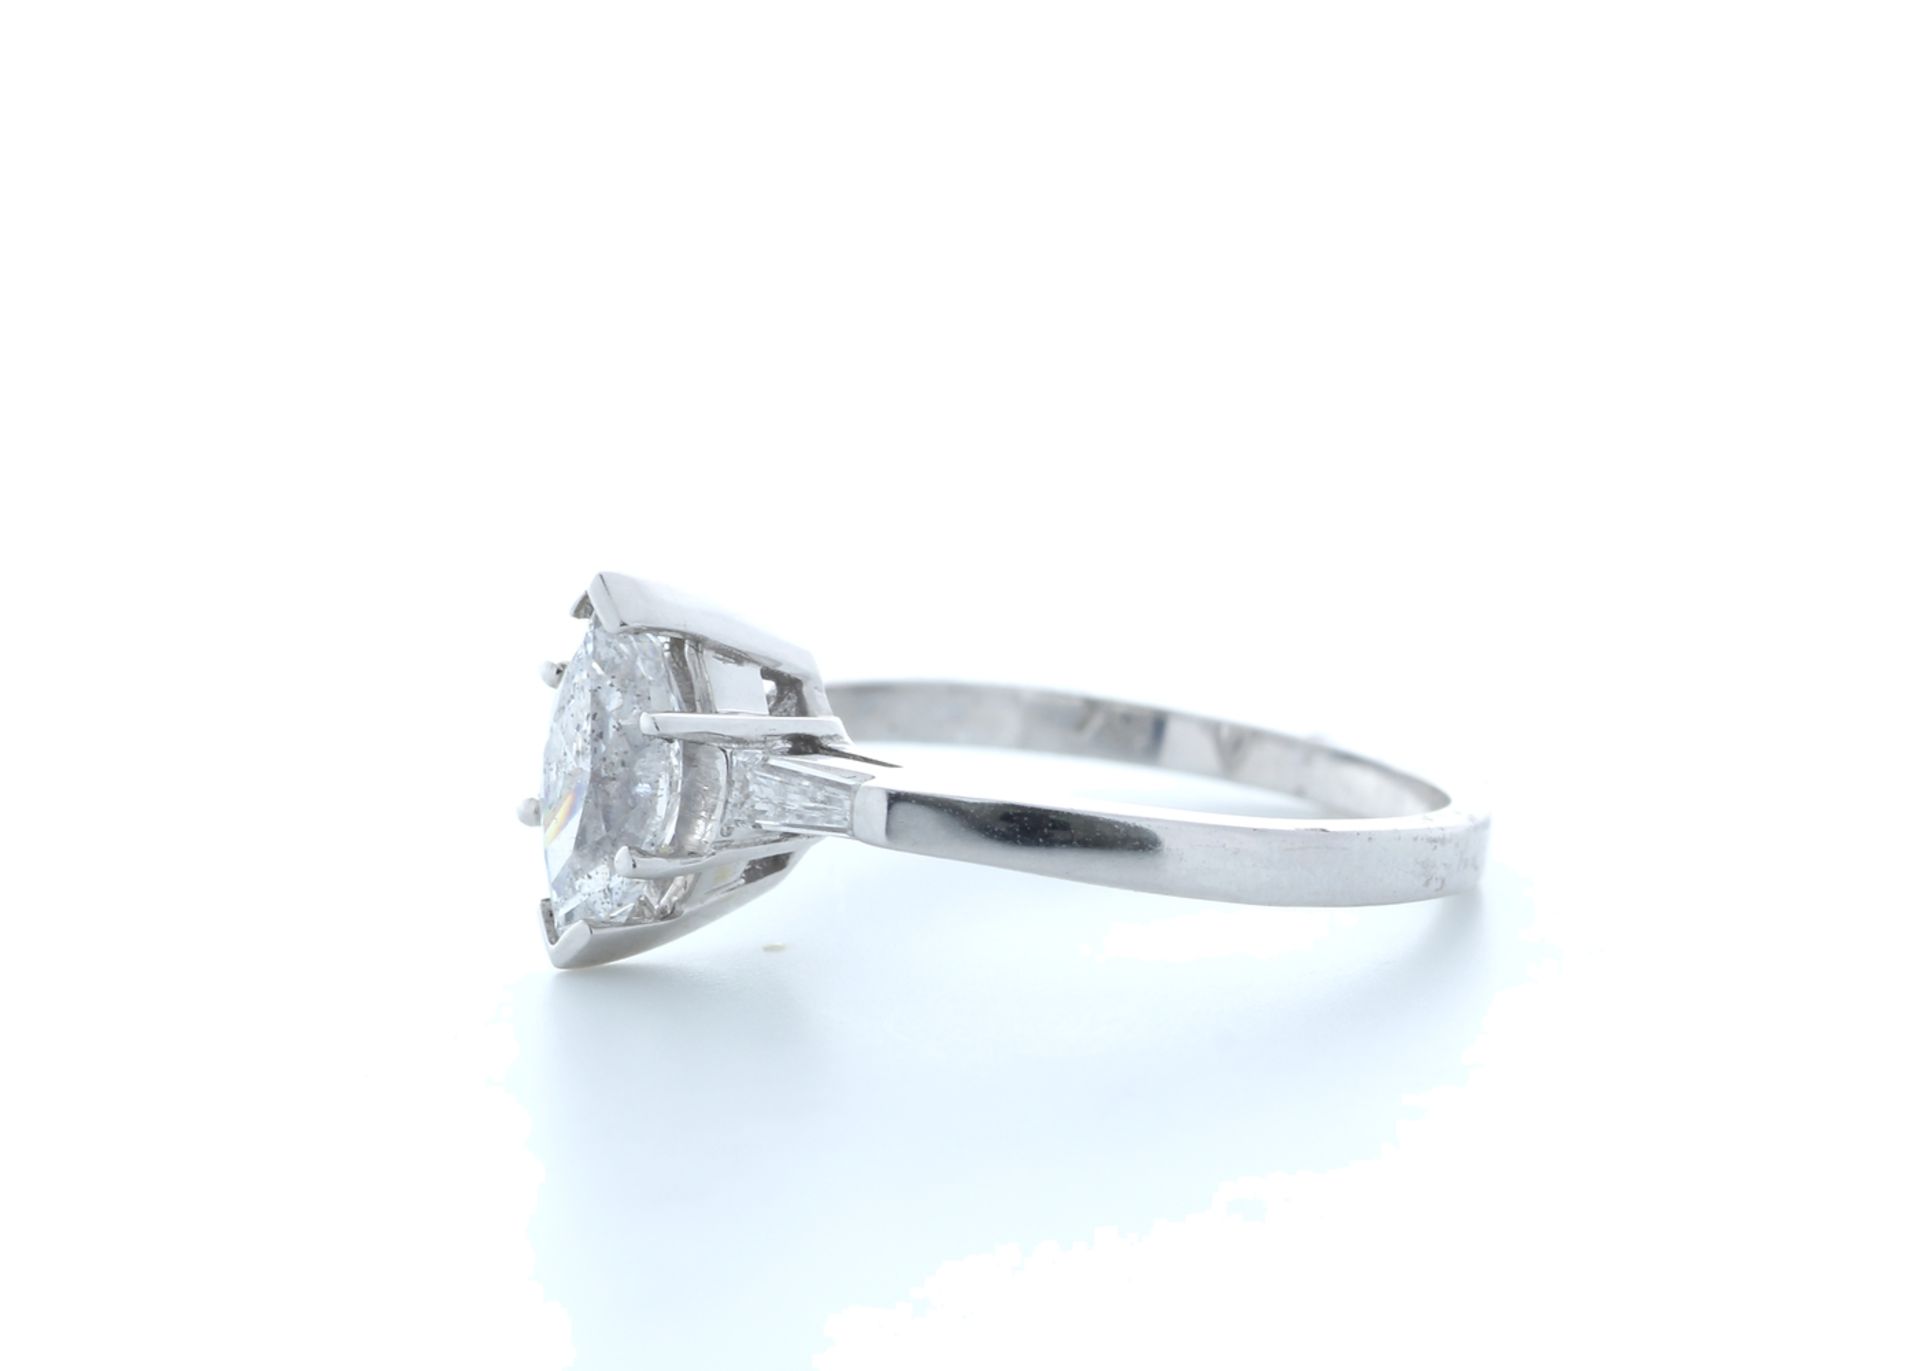 18ct White Gold Marquise Diamond With Stone Set Shoulders 1.22 Carats Carats - Valued by IDI £12, - Image 2 of 5